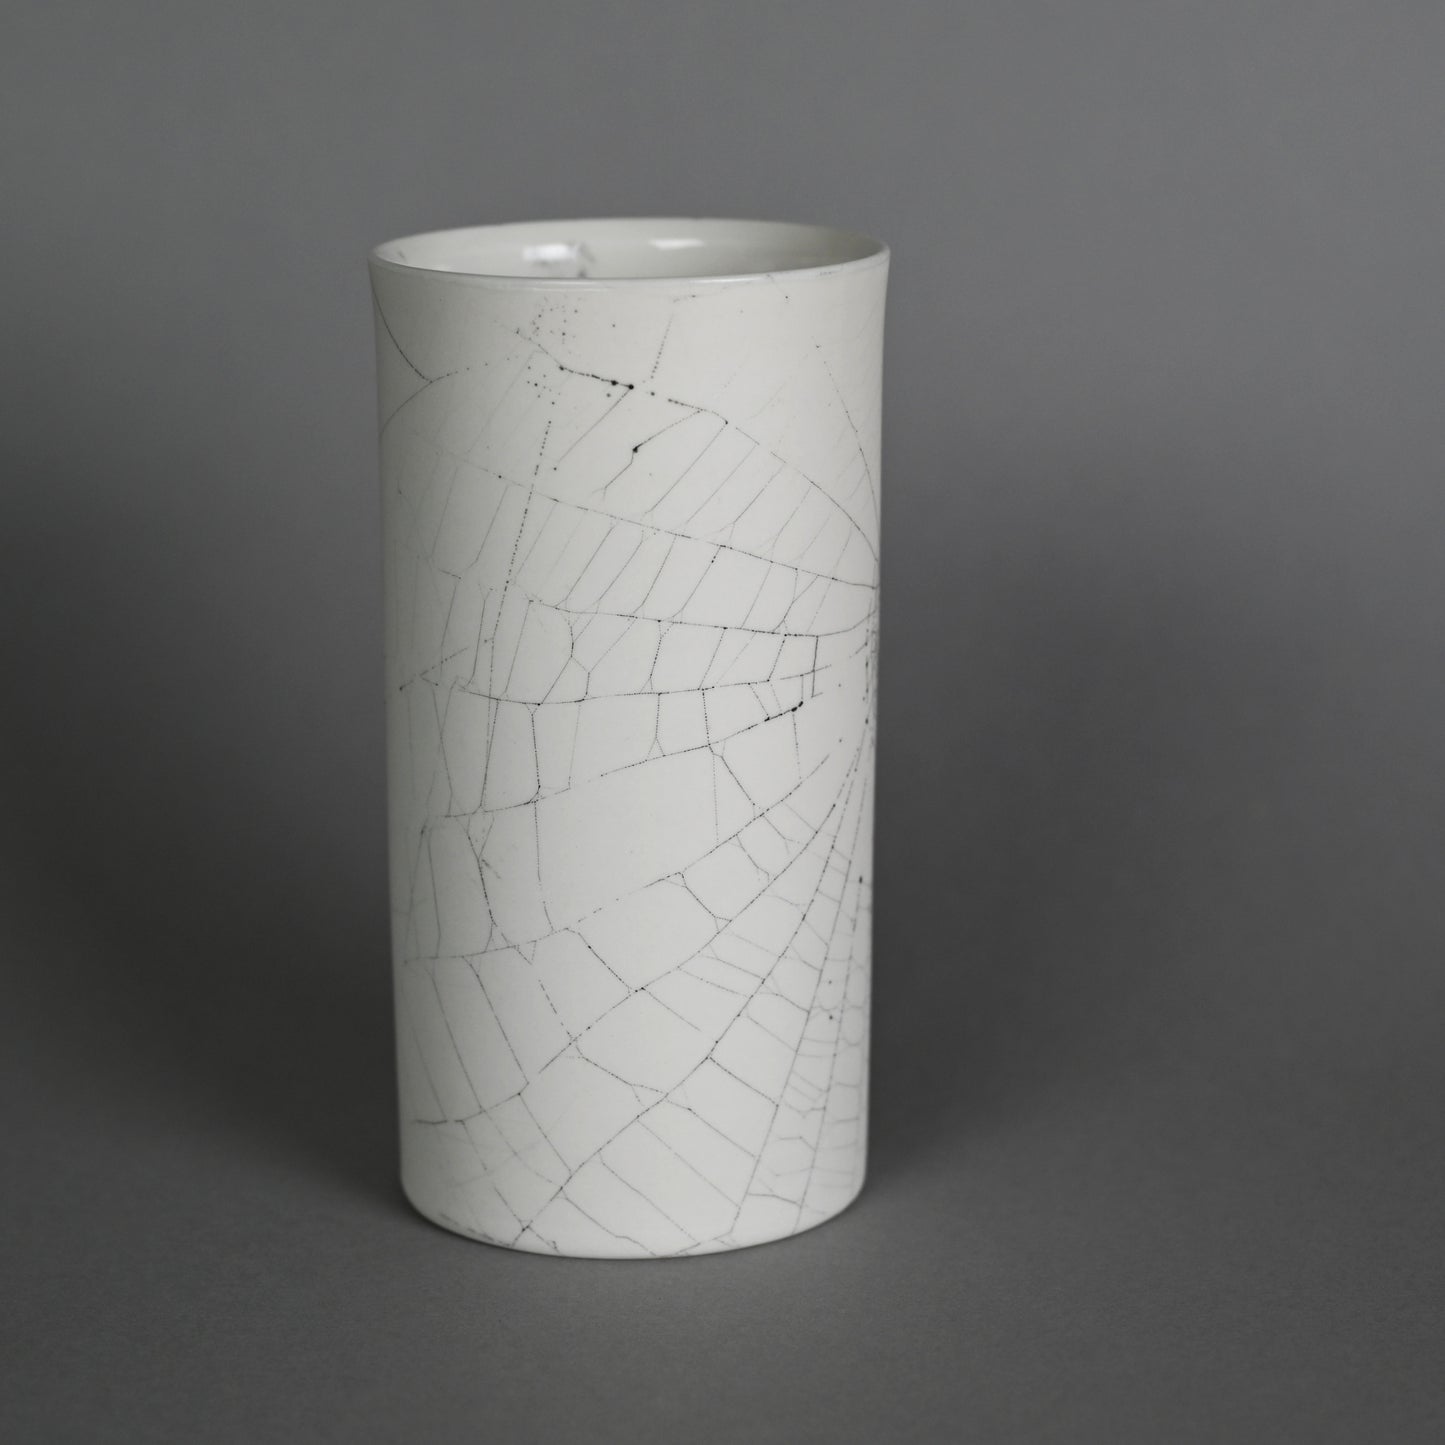 Web on Clay (189), Collected September 25, 2022